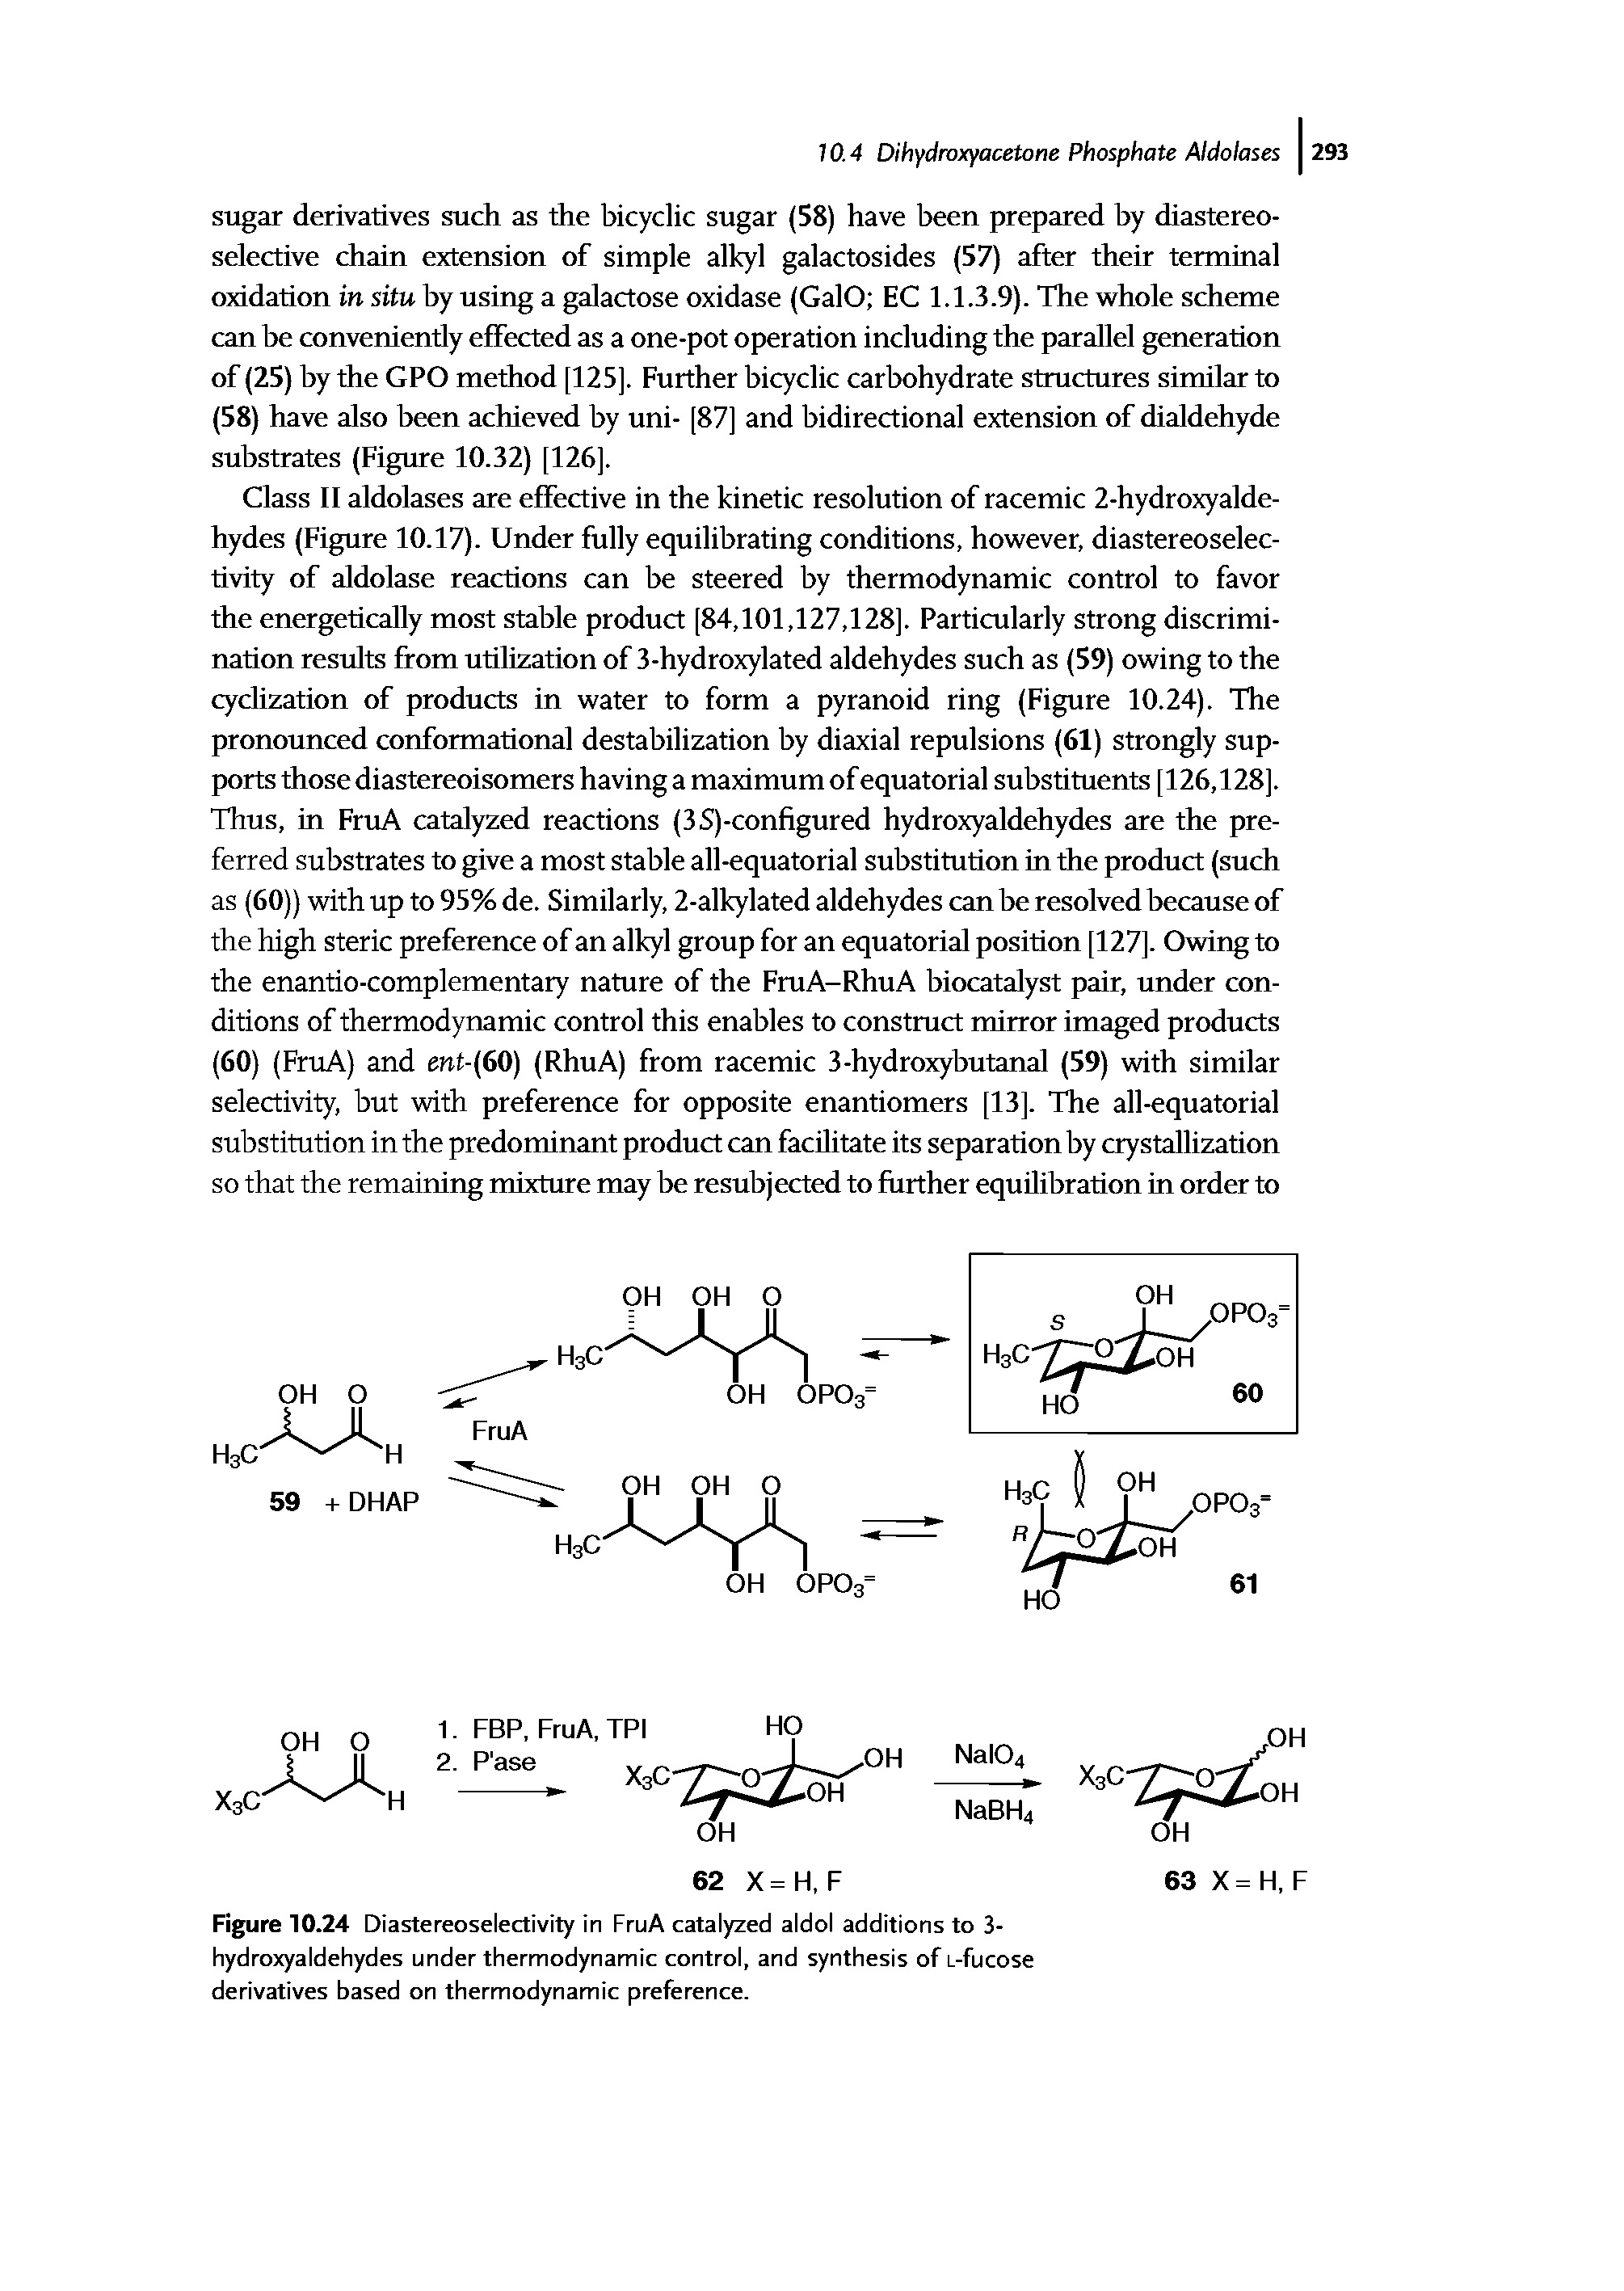 Figure 10.24 Diastereoselectivity in FruA catalyzed aldol additions to 3-hydroxyaldehydes under thermodynamic control, and synthesis of L-fucose derivatives based on thermodynamic preference.